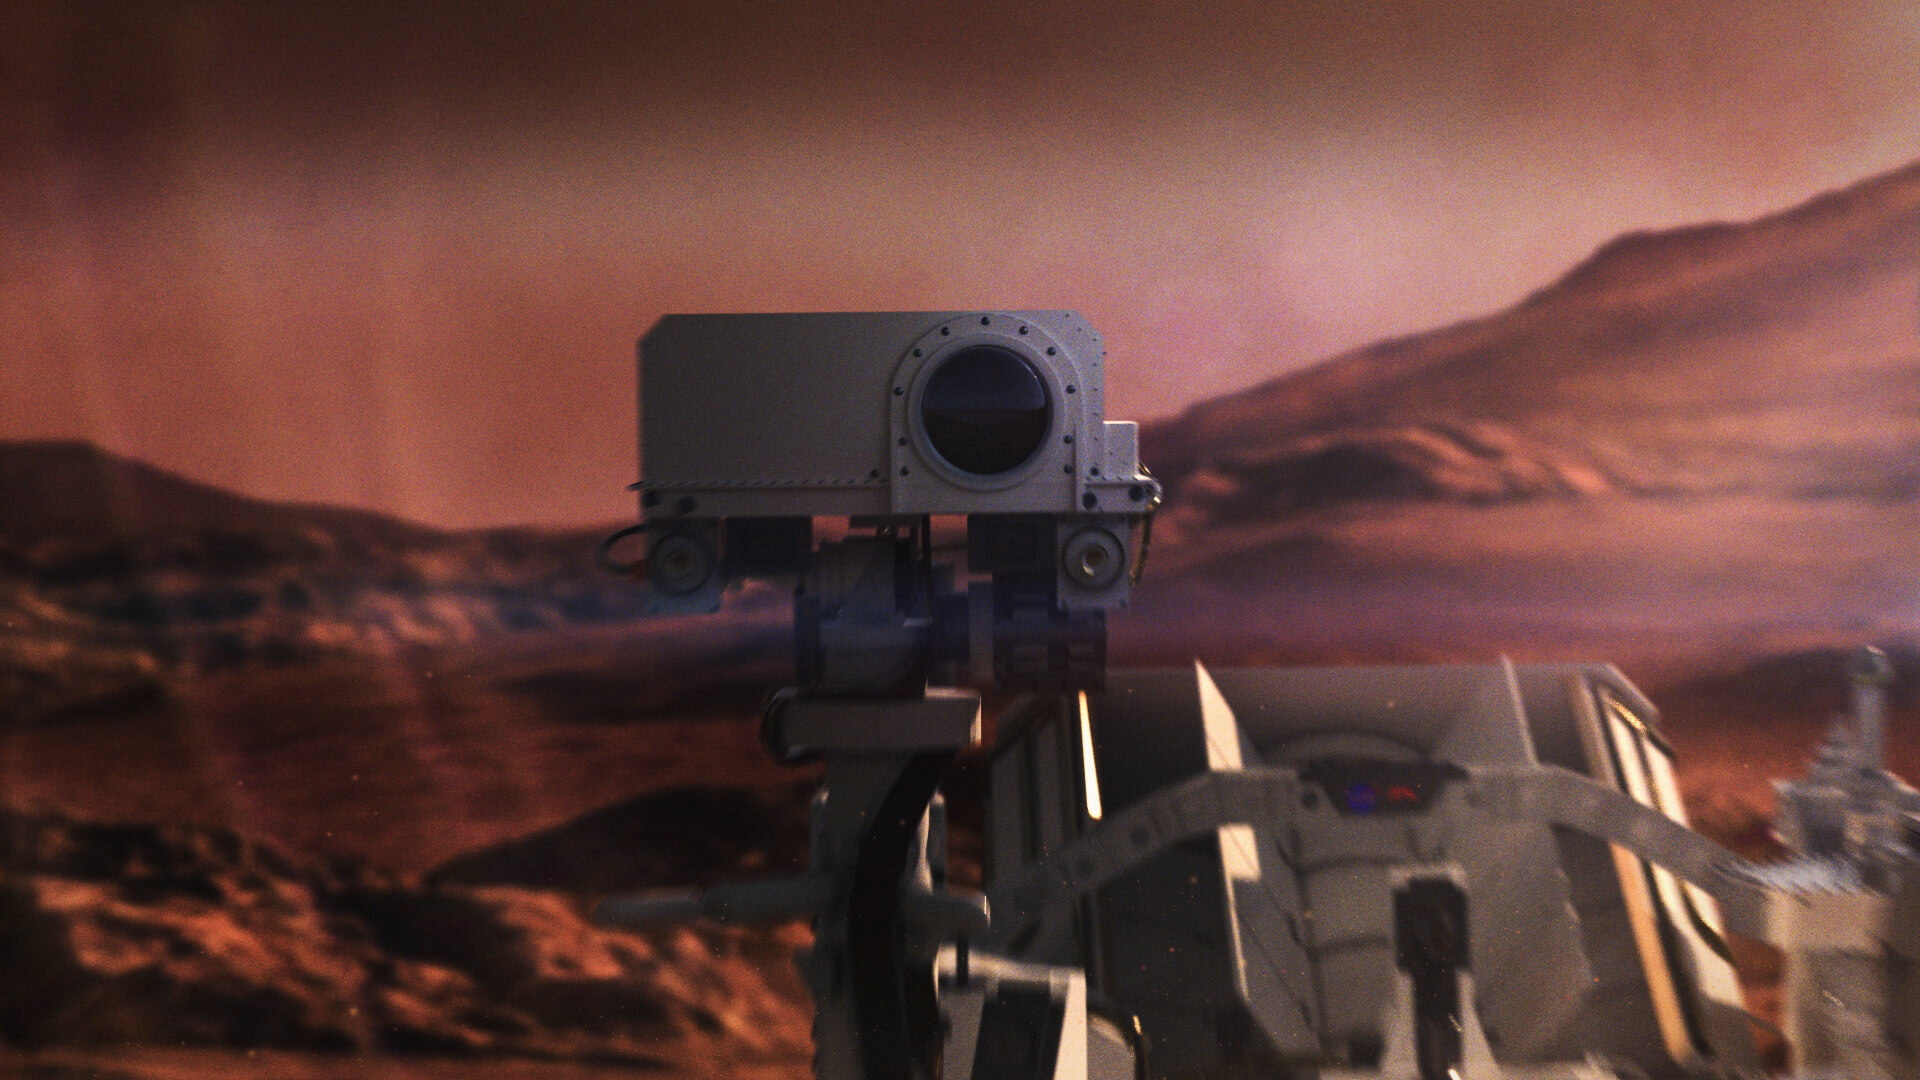 Still from Peraton TVC depicting the lens of a space explorer on another planet created using VFX by VANDAL